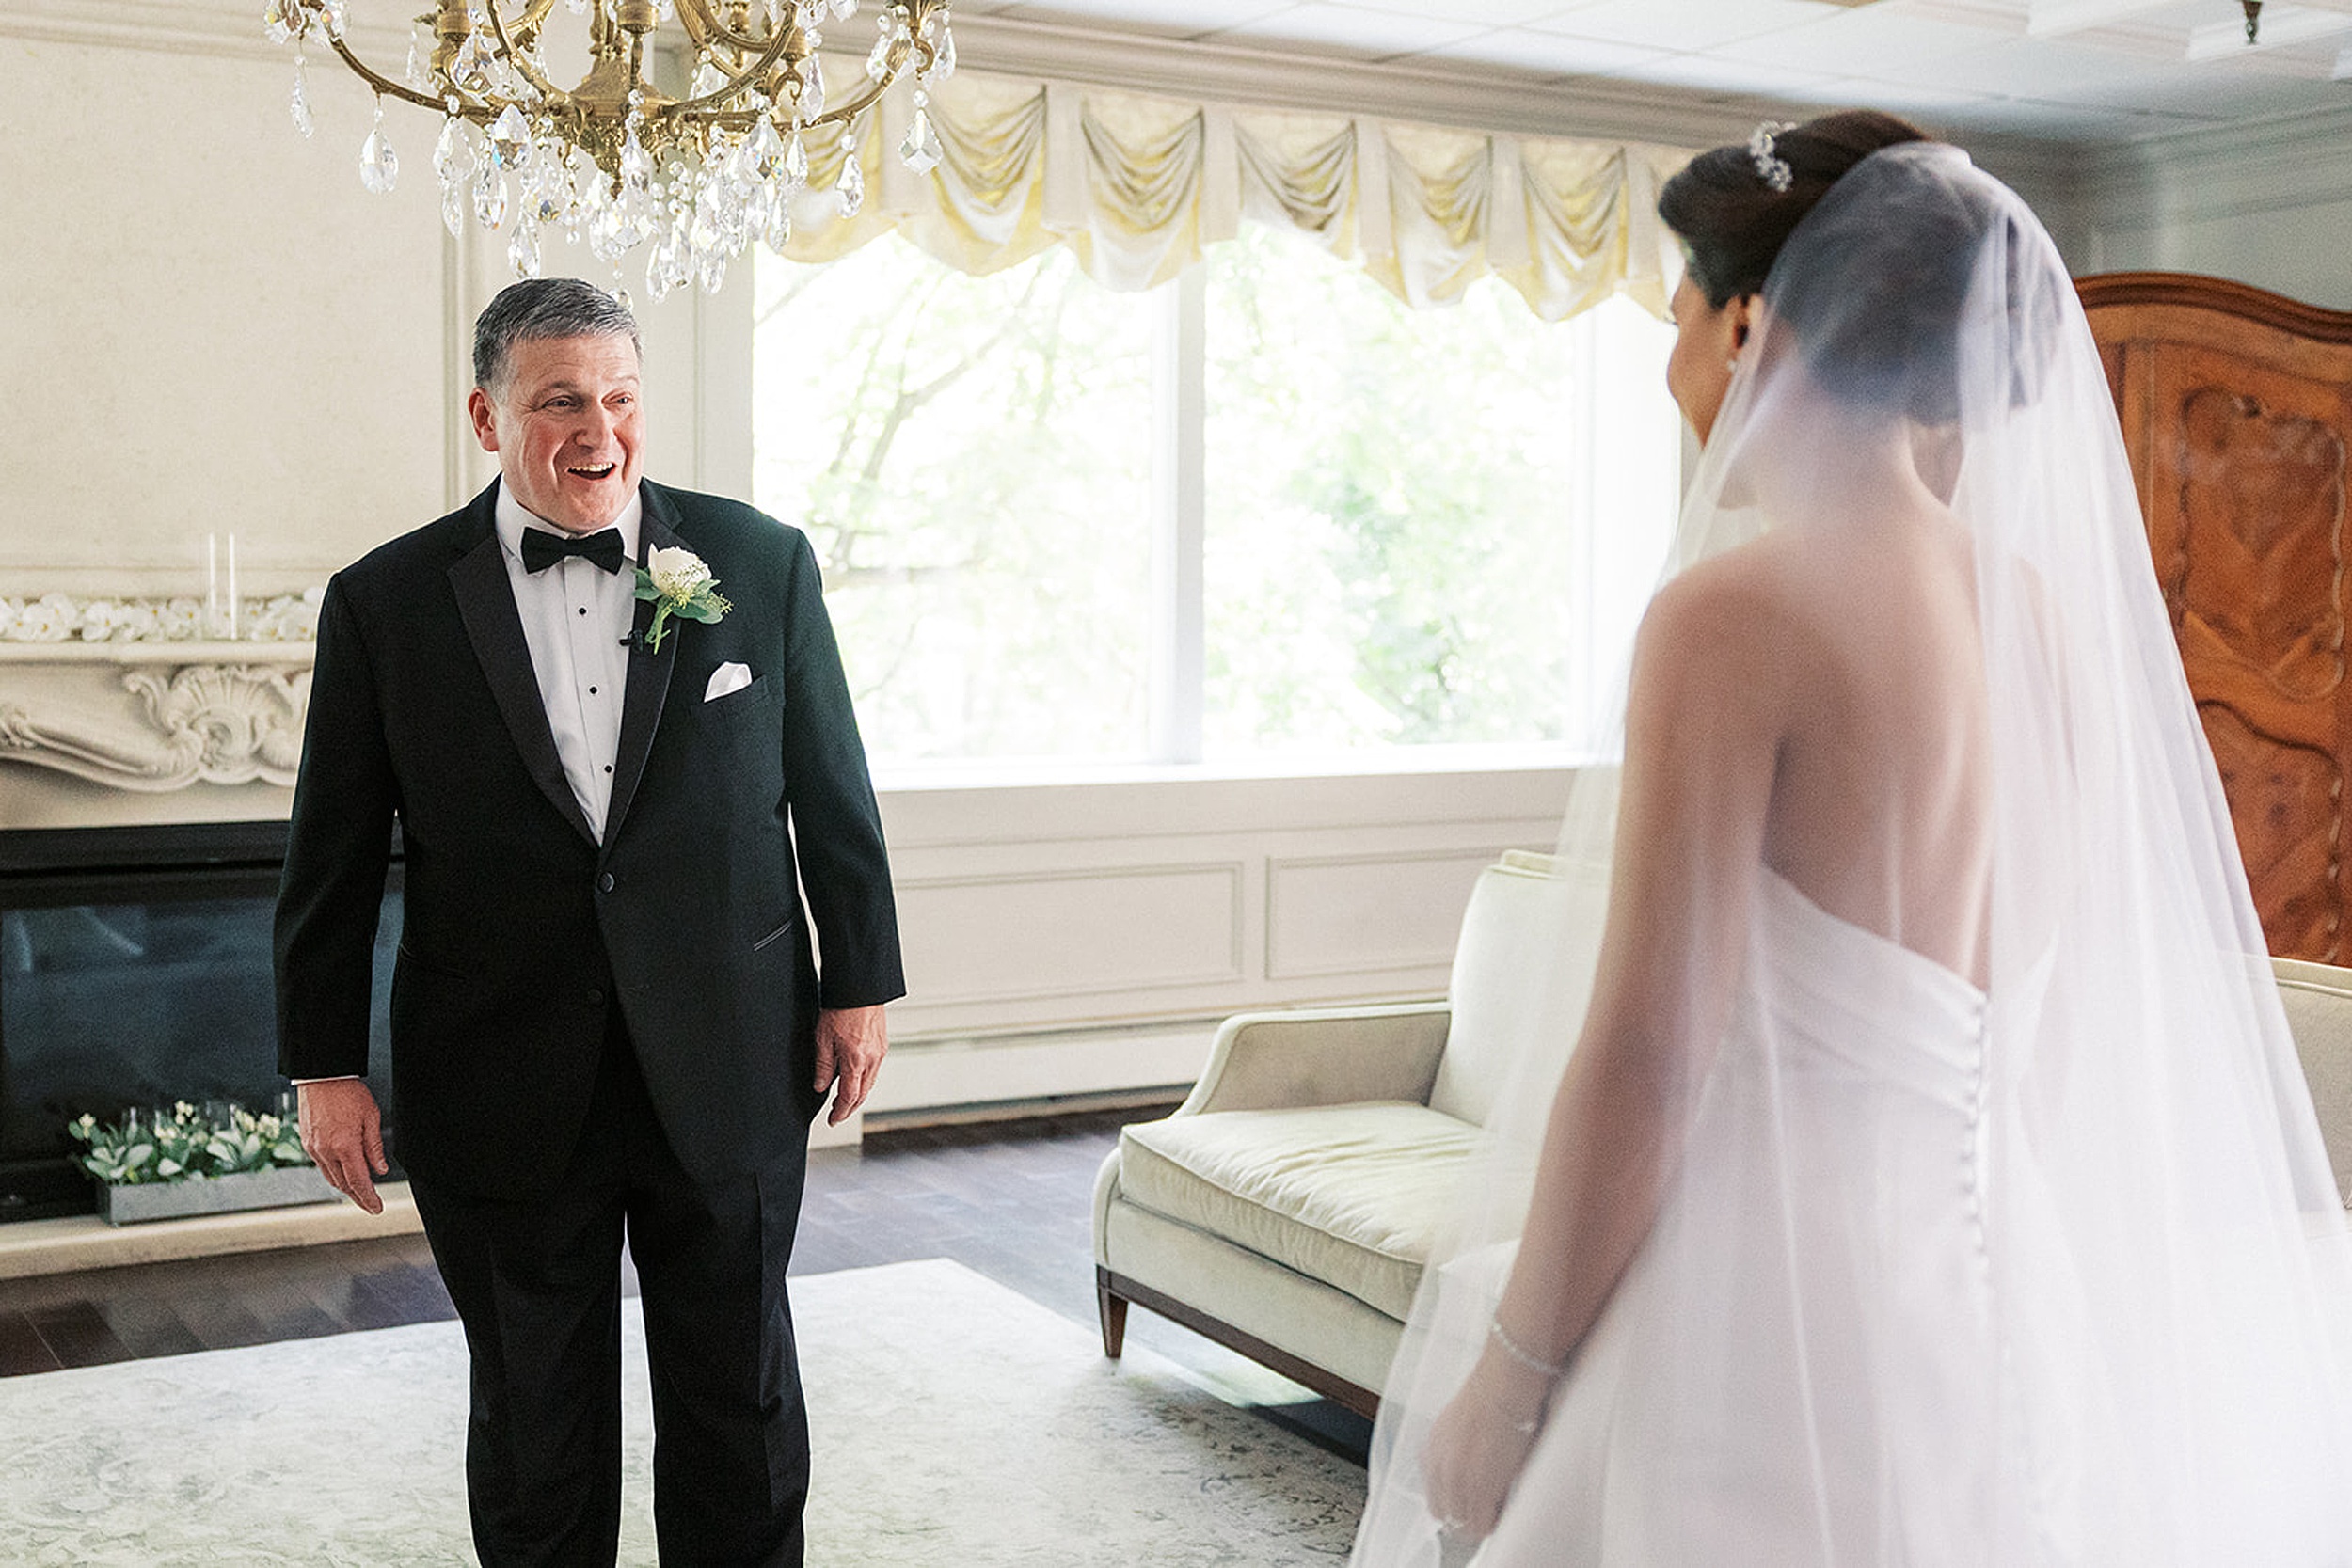 A father in a black tuxedo sees his daughter in her dress and veil for the first time under a crystal chandelier at a valley regency wedding